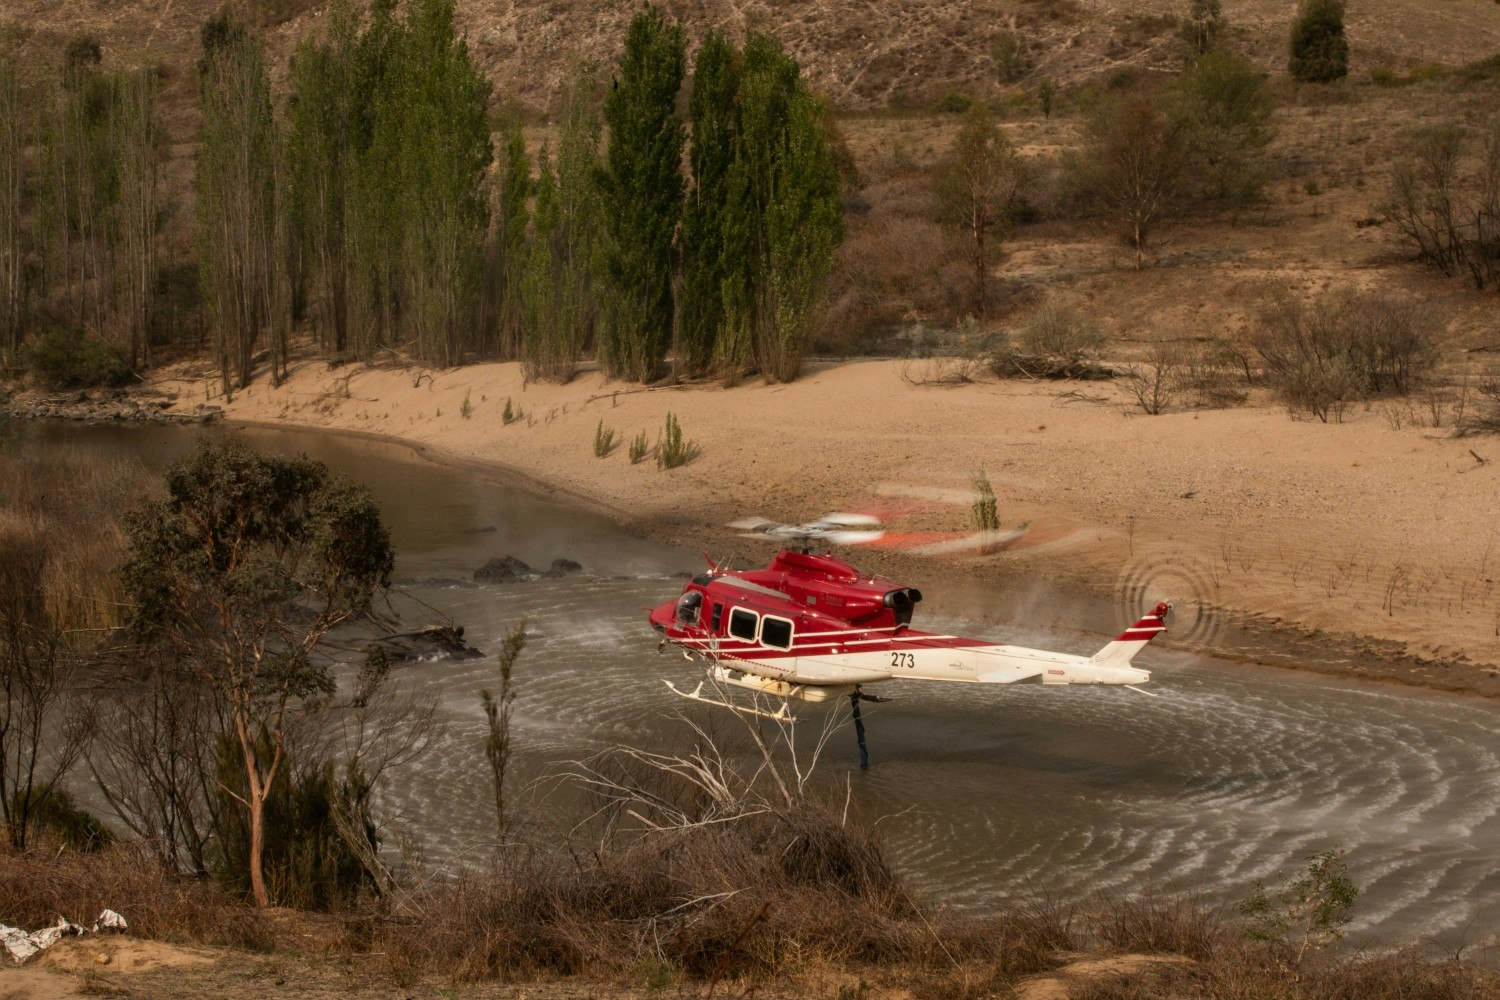 A water bombing helicopter picks up water as fire creeps forward in Namadgi National Park  